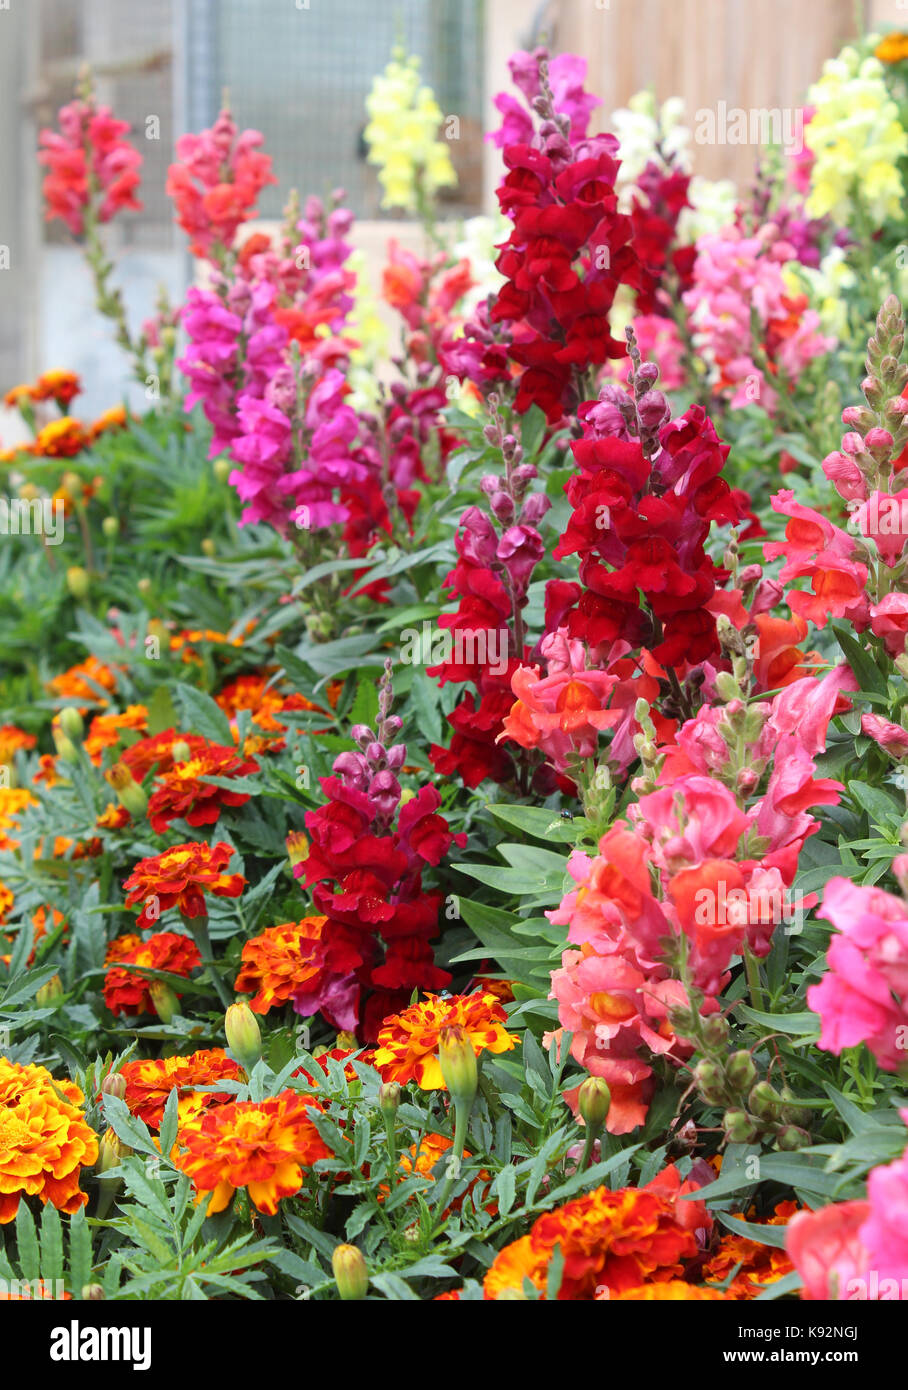 The beautiful brightly colored summer bedding plants of Antirrhinum majus also known as Snap Dragons and Tagetes patula (French Marigolds). Stock Photo